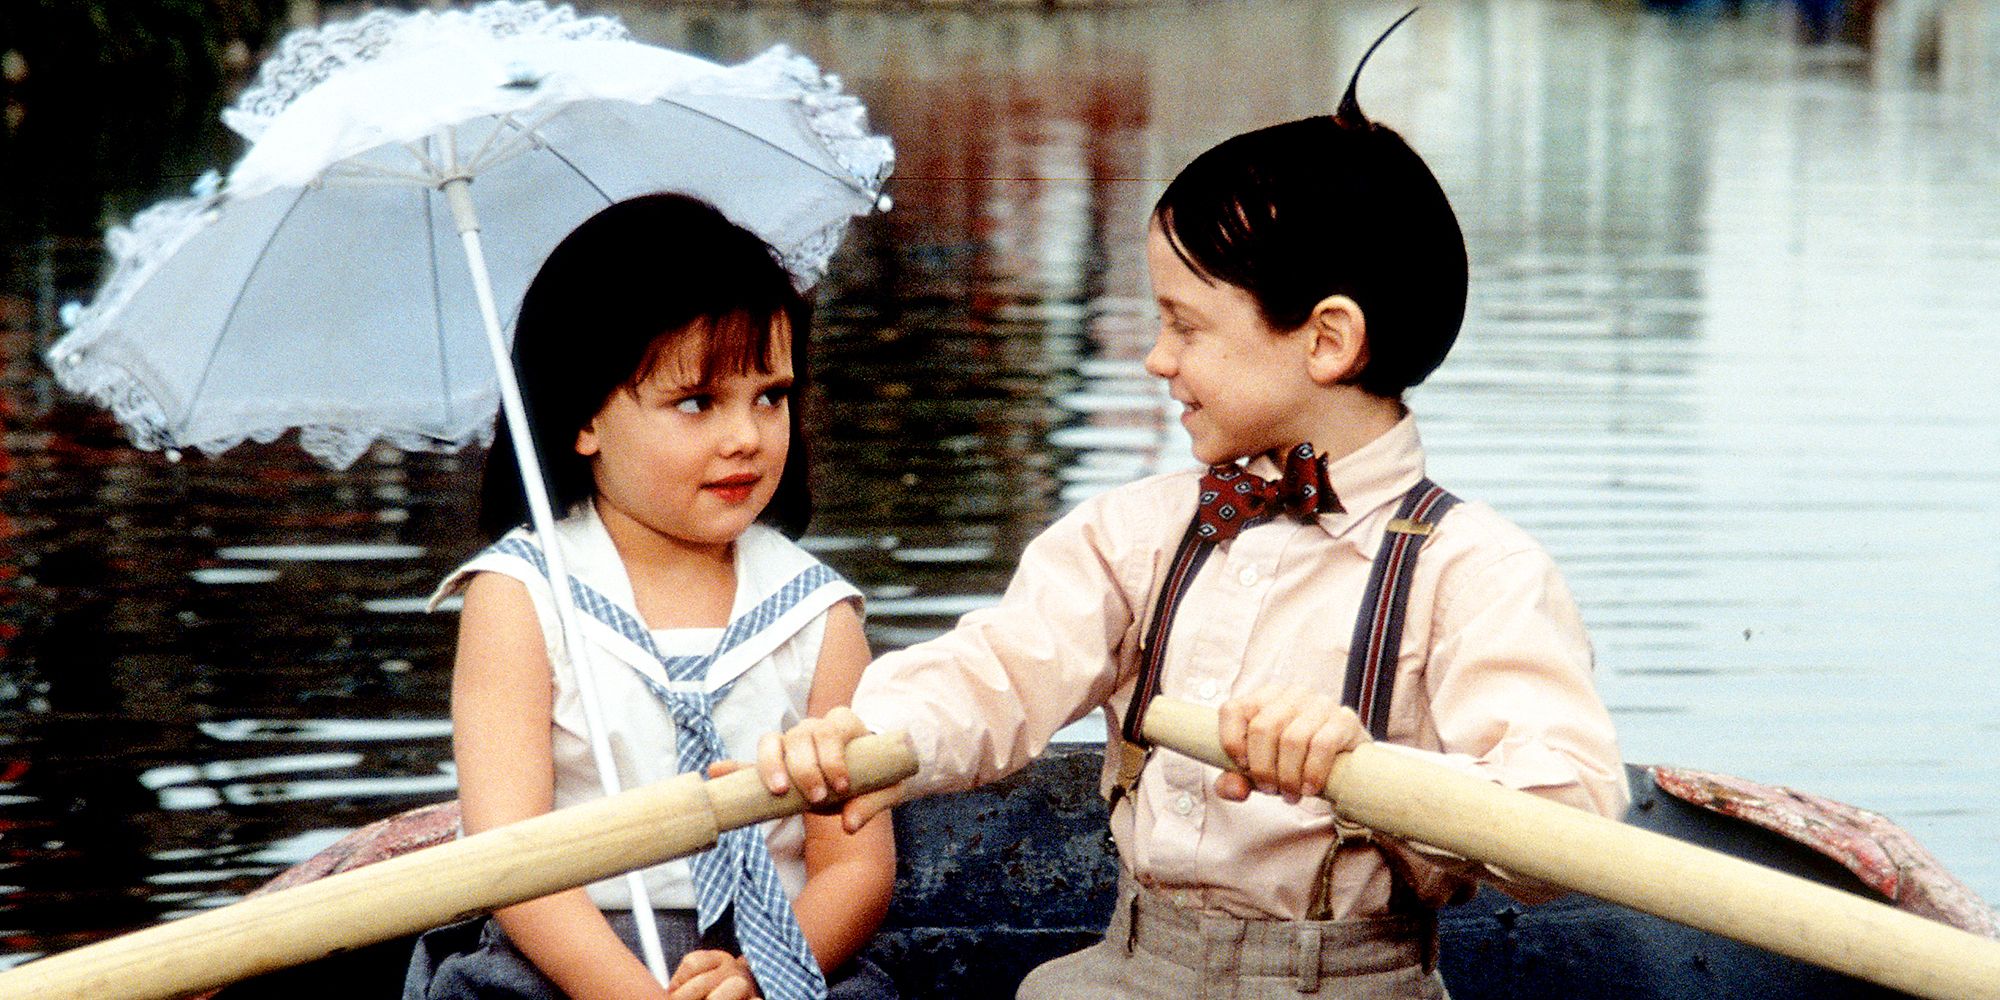 Sparky and Darla sit in a row boat in The Little Rascals